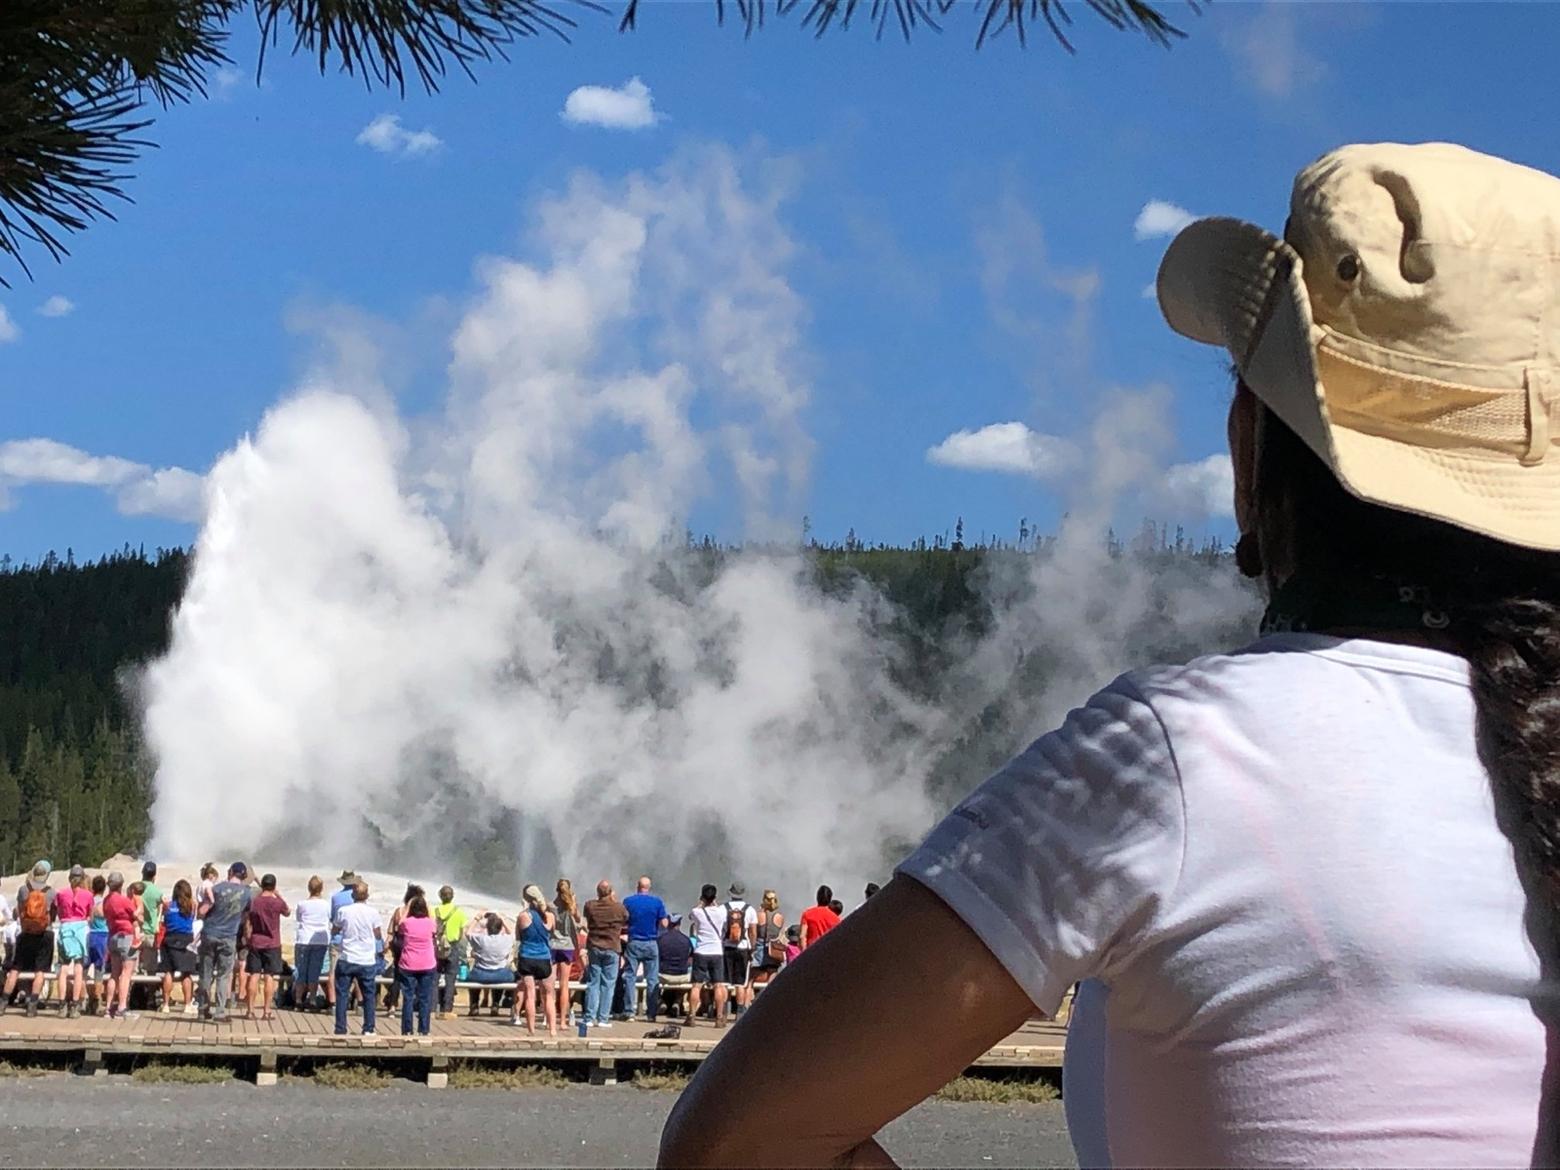 The summer after she was sworn in as a new member of Congress, Haaland visited Yellowstone and America's first national park left her in awe. During her fact-finding mission she inquired about park infrastructure and crowding issues, climate change and wildlife. Photo courtesy US Rep. Deb Haaland